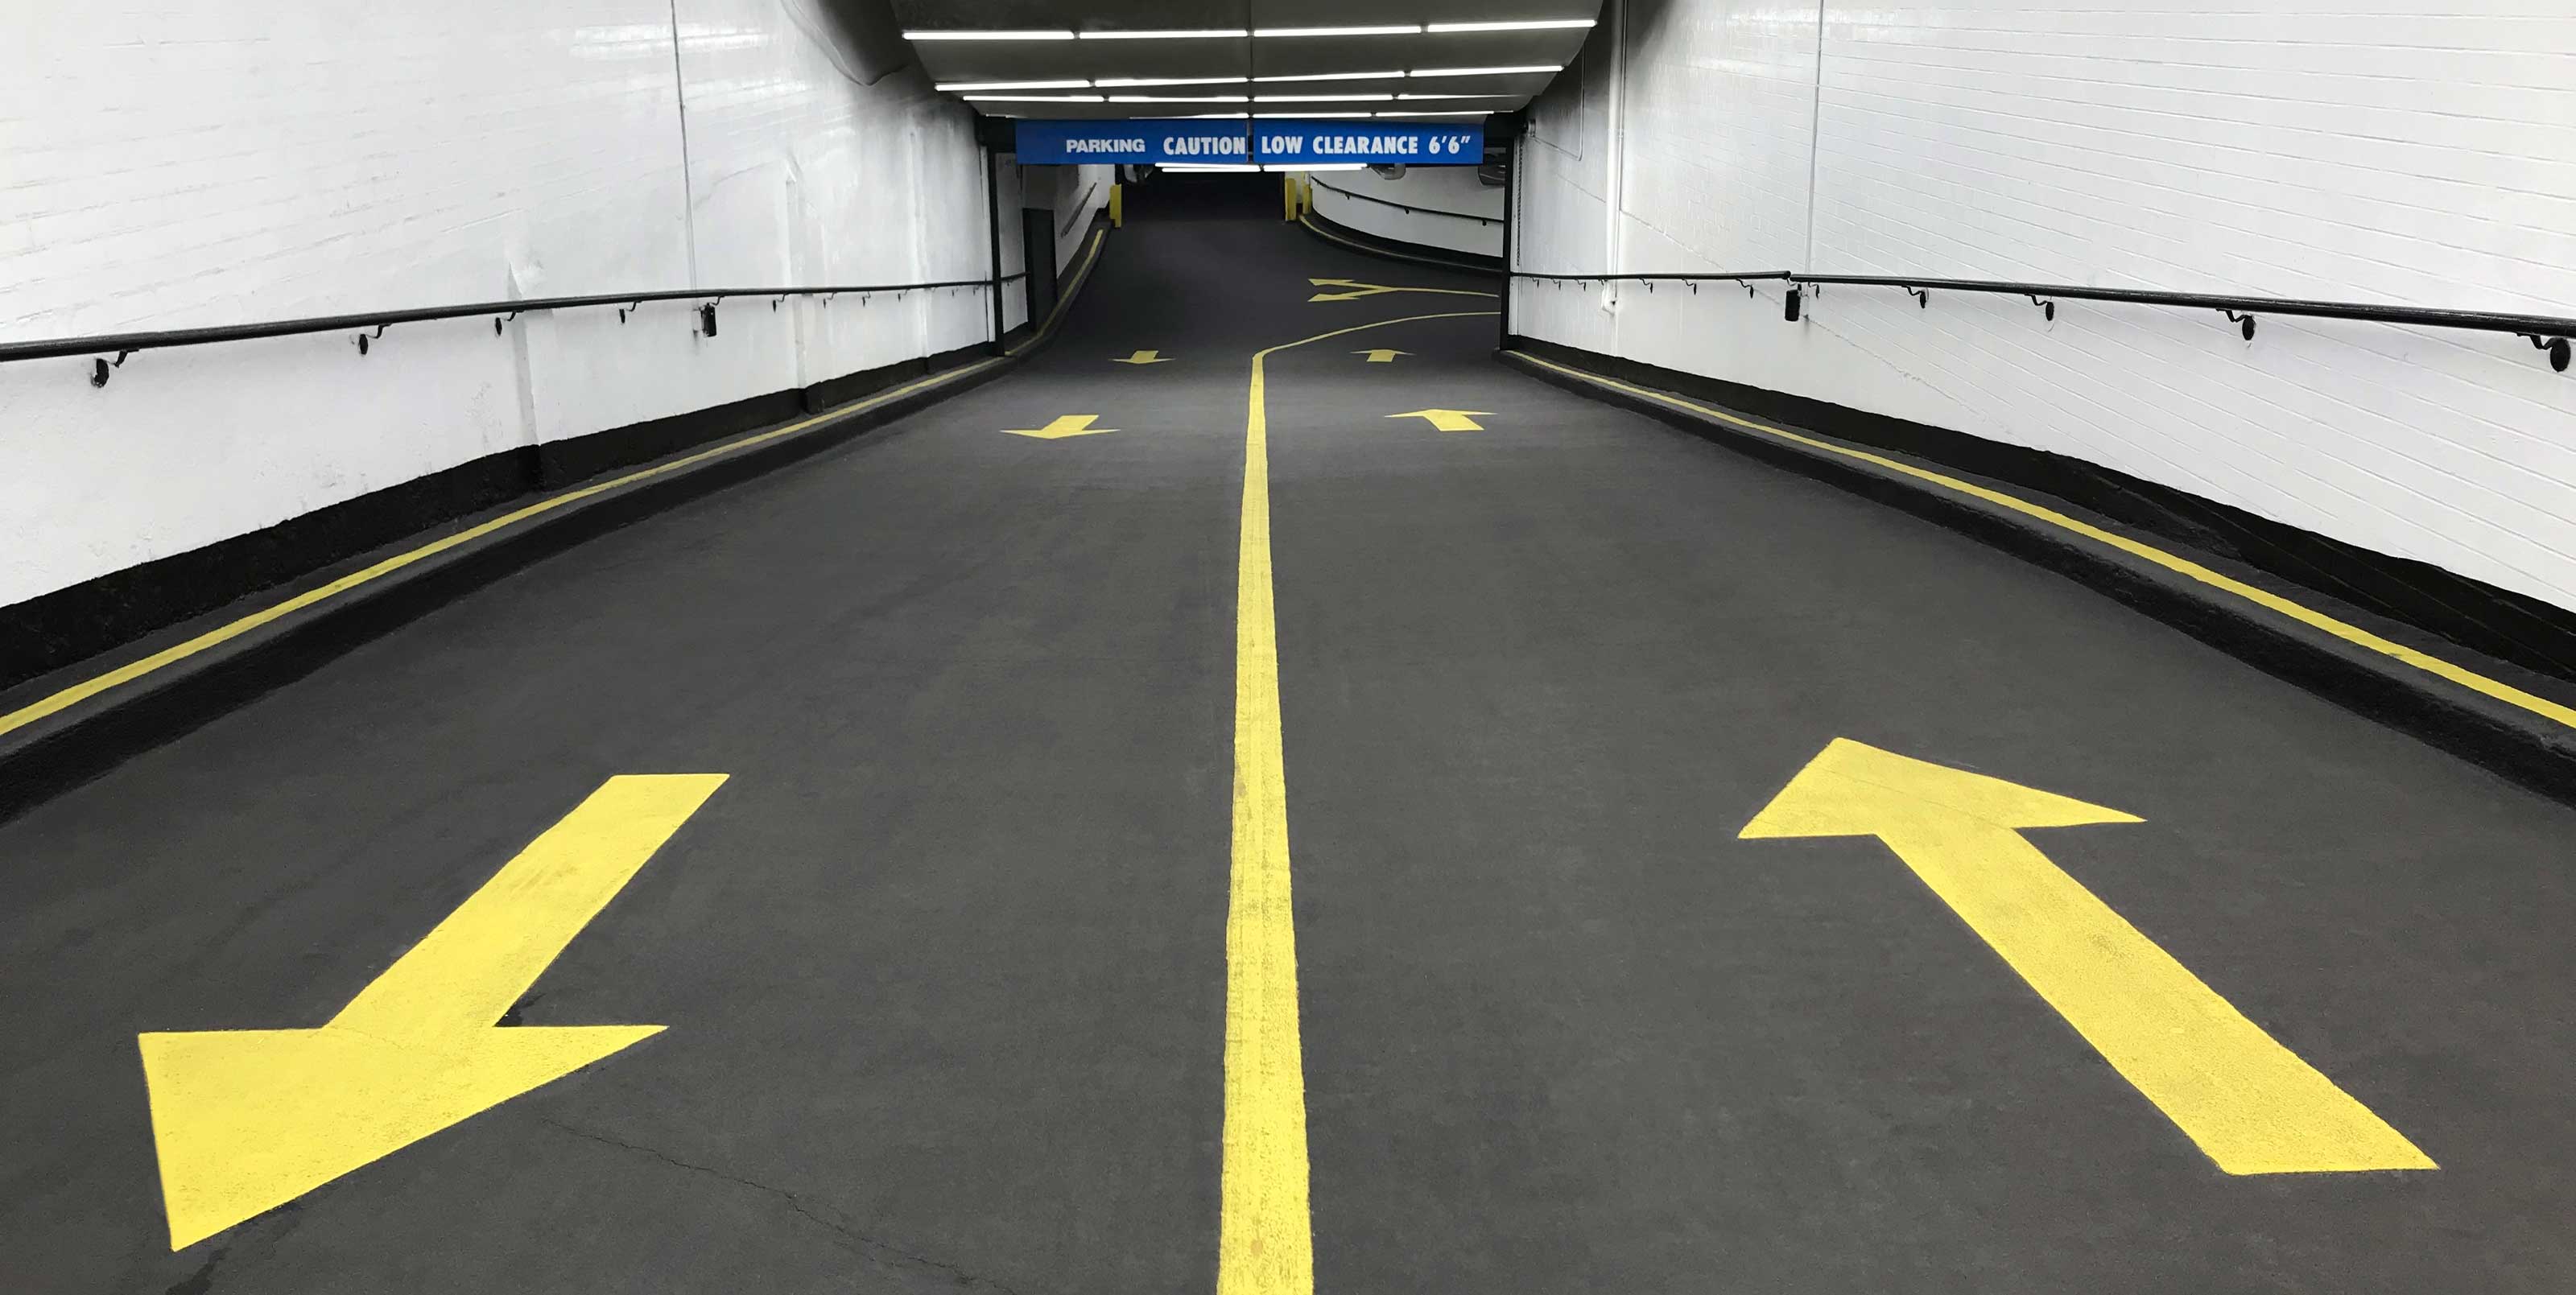 Underground parking entrance with yellow arrow markers